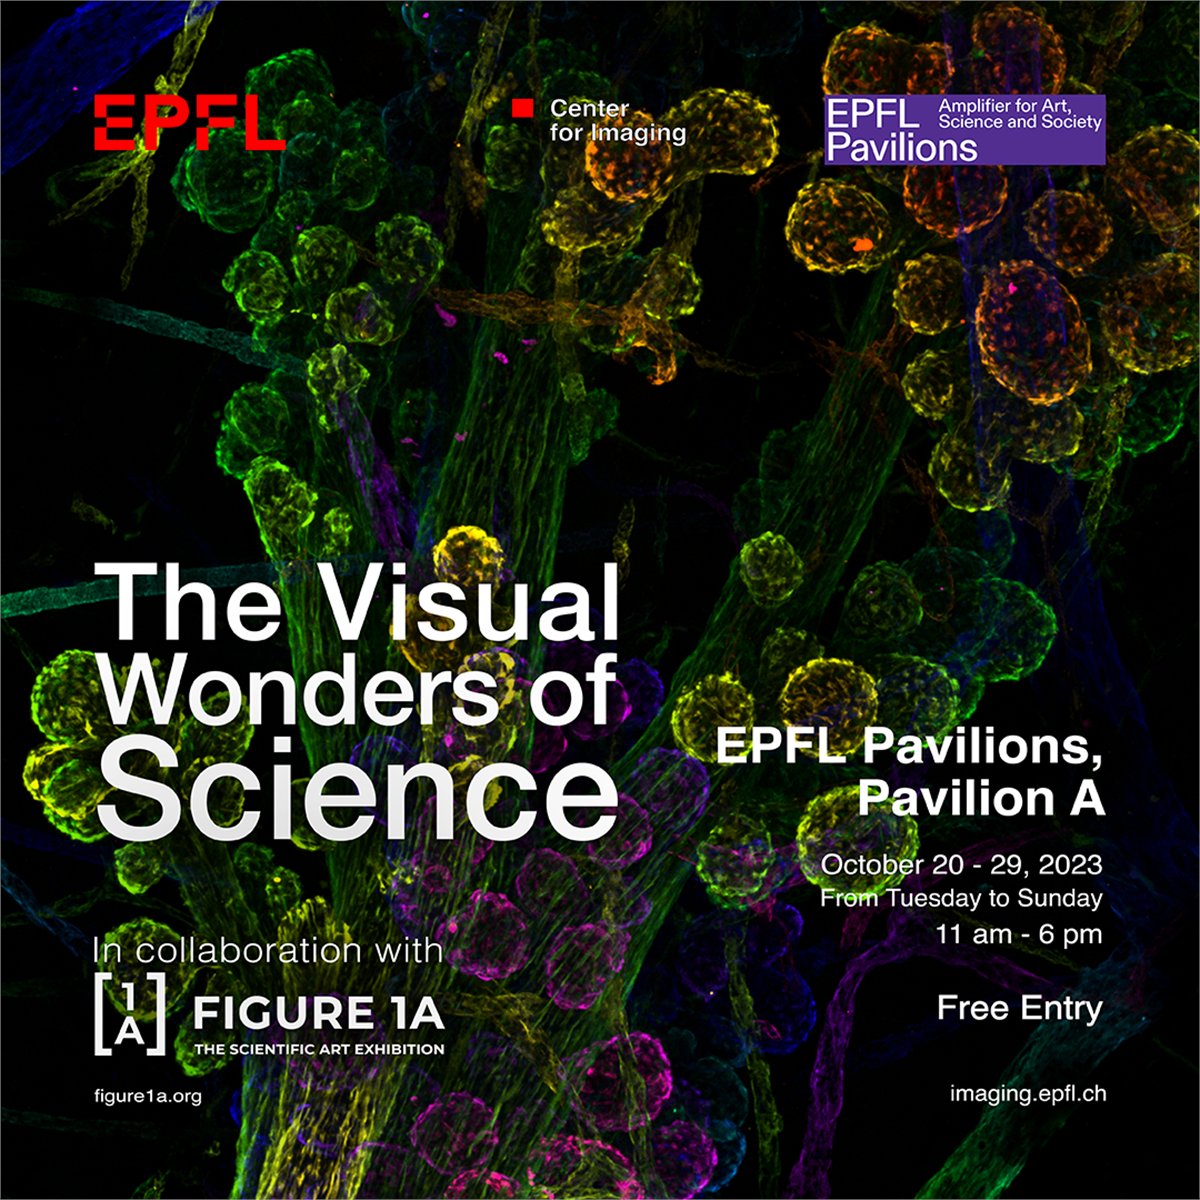 Want to get a glimpse of what's going on inside EPFL laboratories and inside scientists' imagination? Don't miss the exhibition 'The Visual Wonders of Science' presented by @EPFL_Imaging and @Figure_1A 📍@EPFLPavilions until 29 Oct. epfl-pavilions.ch/exhibitions/th…